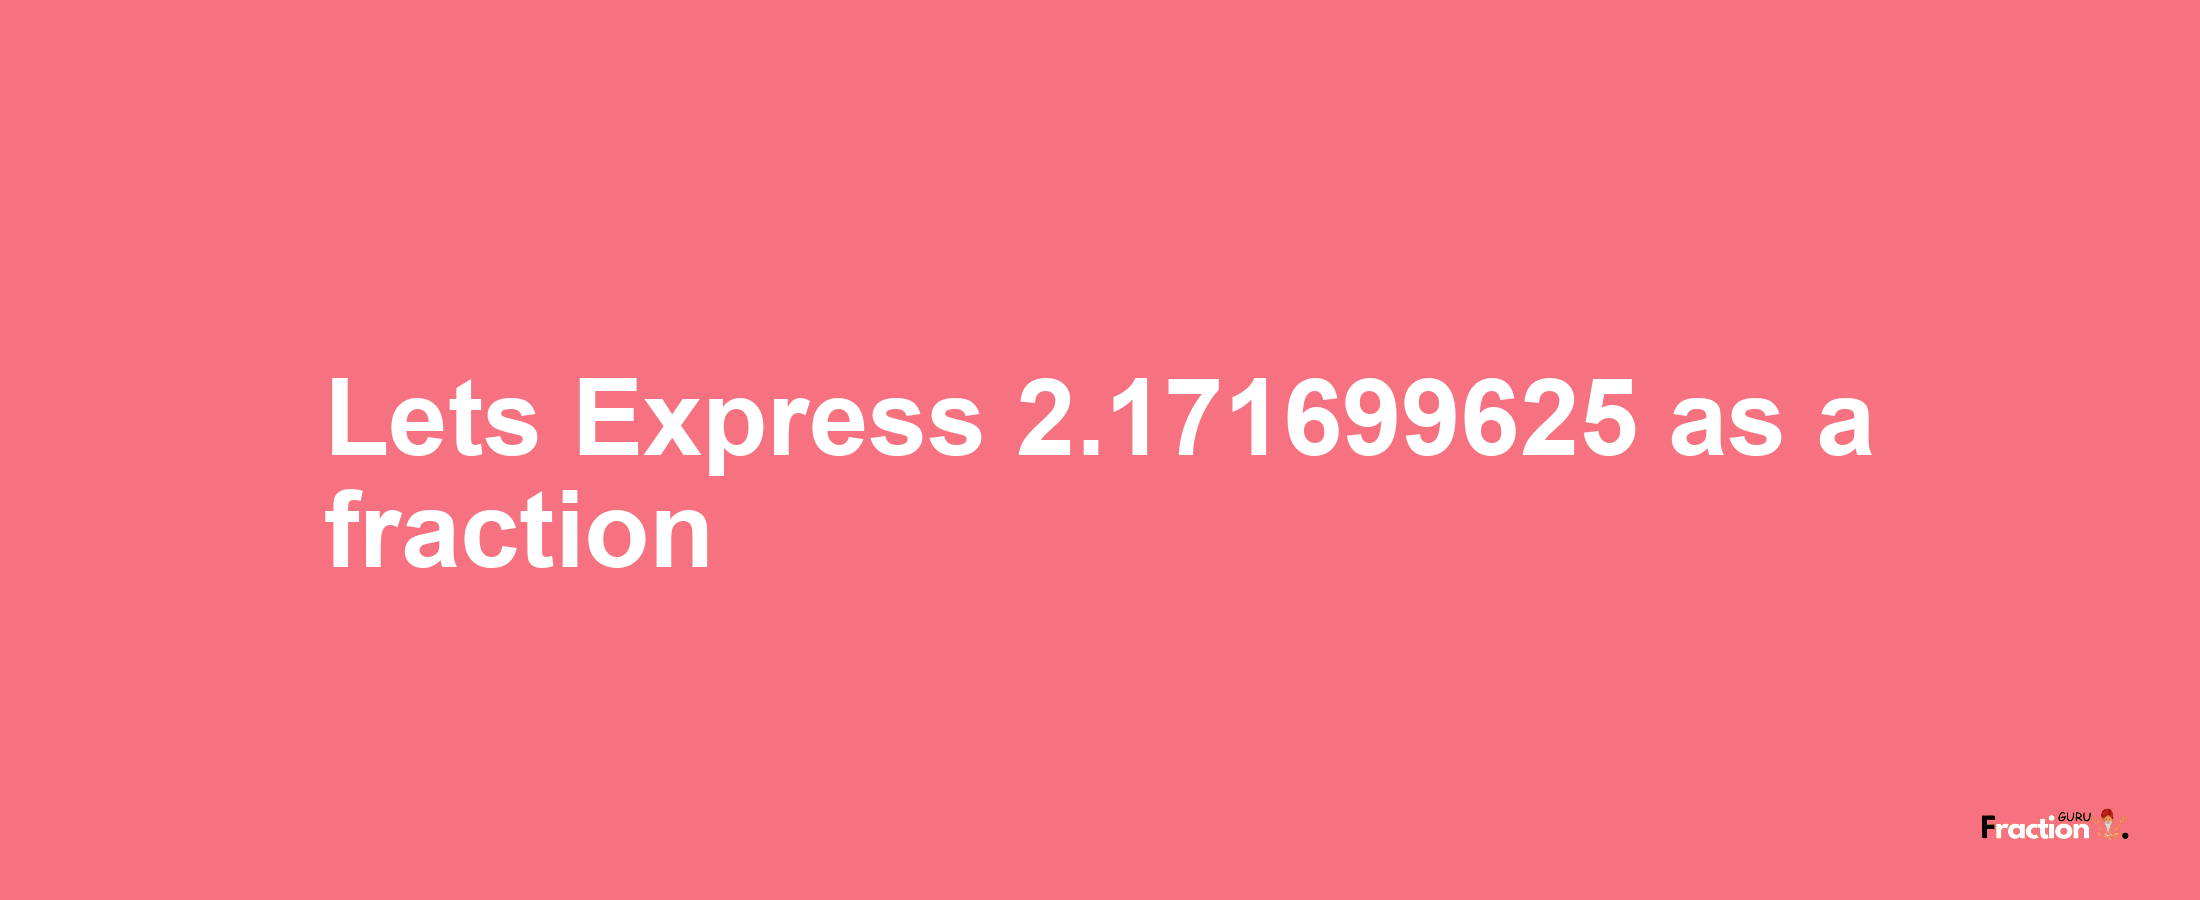 Lets Express 2.171699625 as afraction